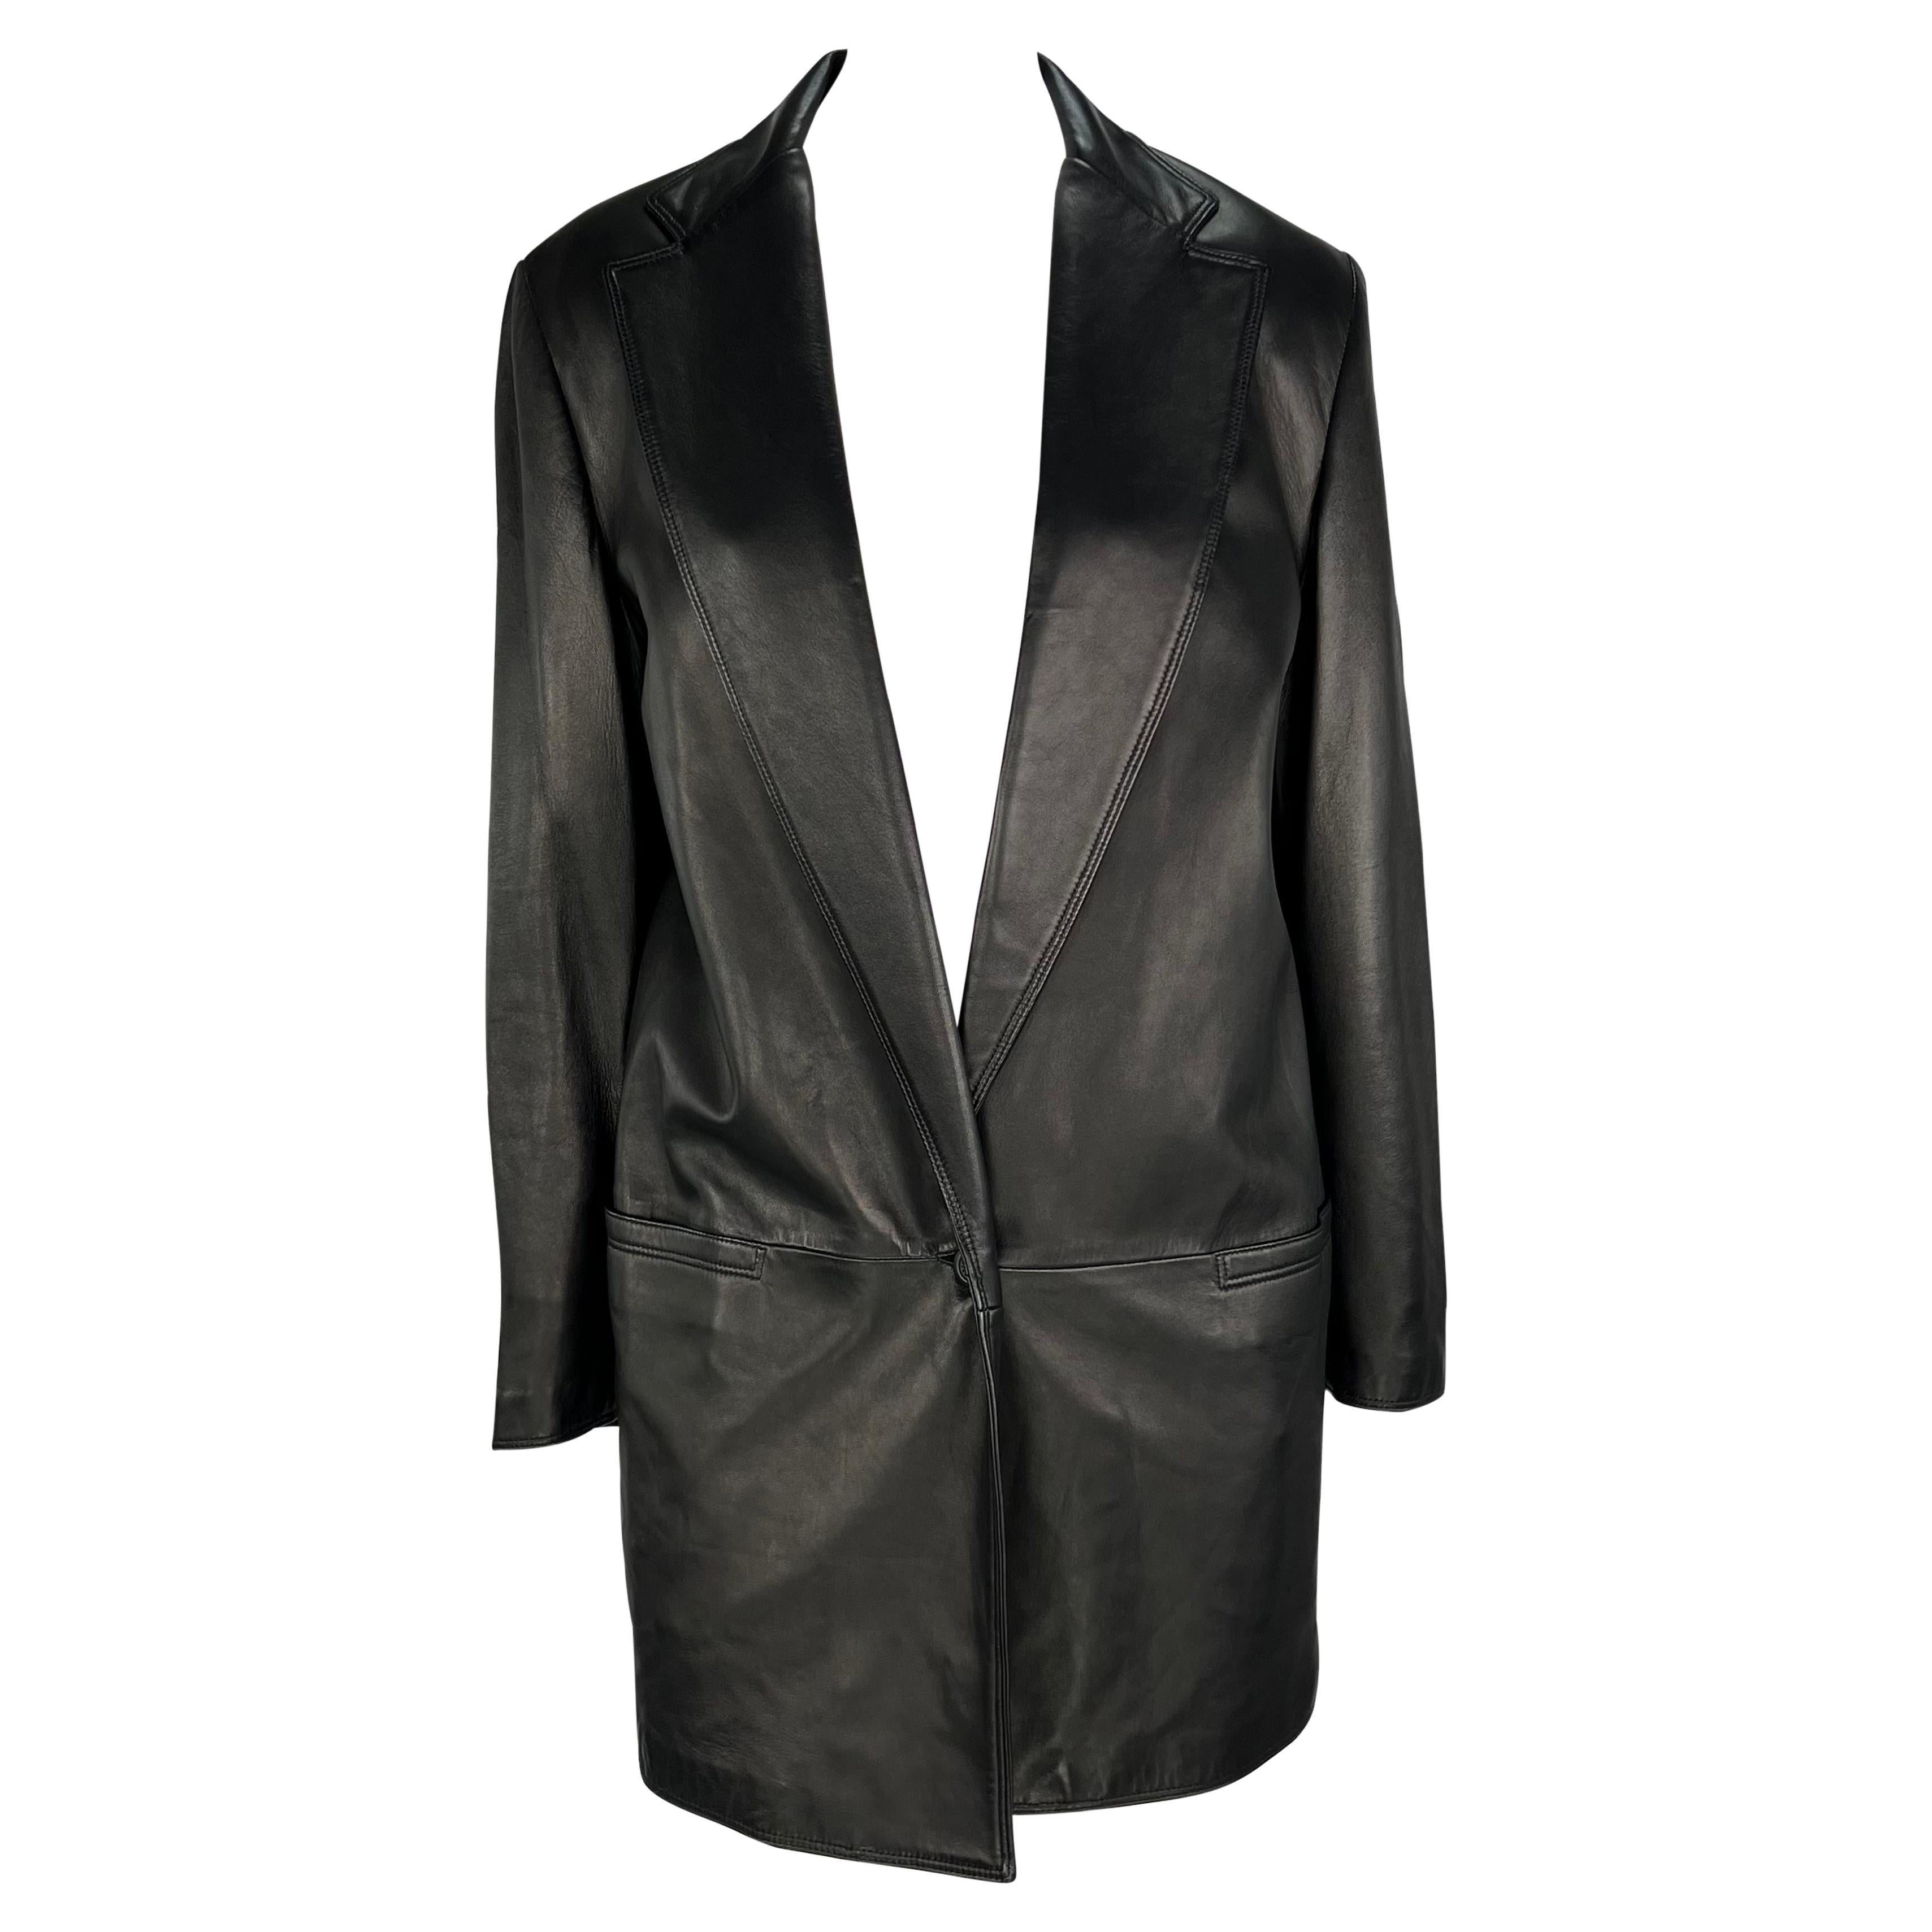 F/W 1997 Gianni Versace Black Leather Oversized Blazer Plunging Mini Dress In Excellent Condition For Sale In West Hollywood, CA